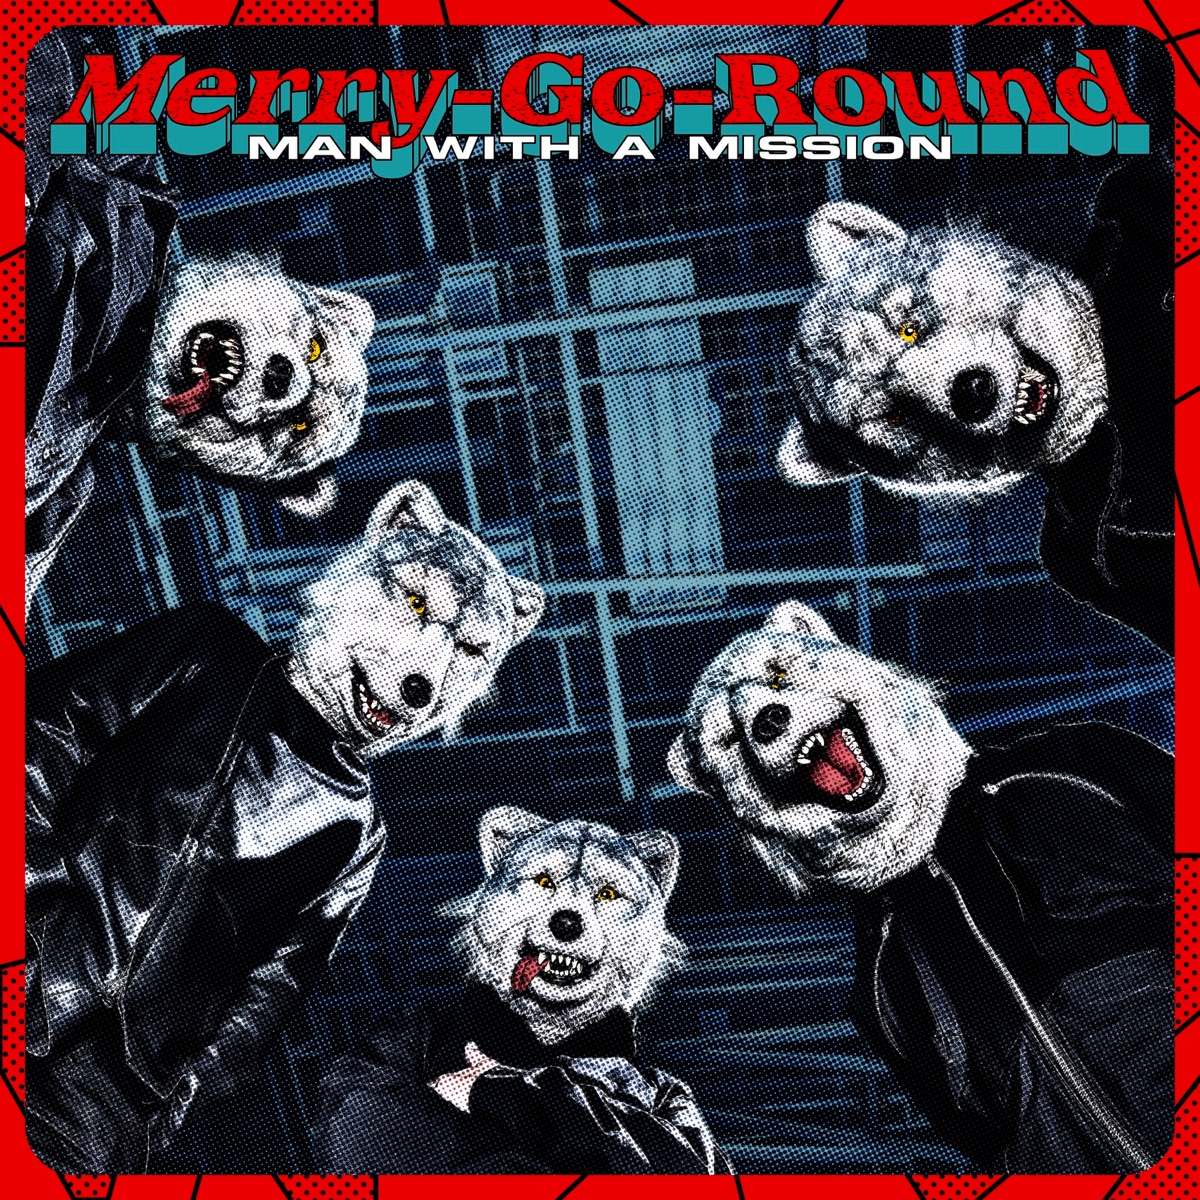 Cover for『MAN WITH A MISSION - Merry-Go-Round』from the release『Merry-Go-Round』